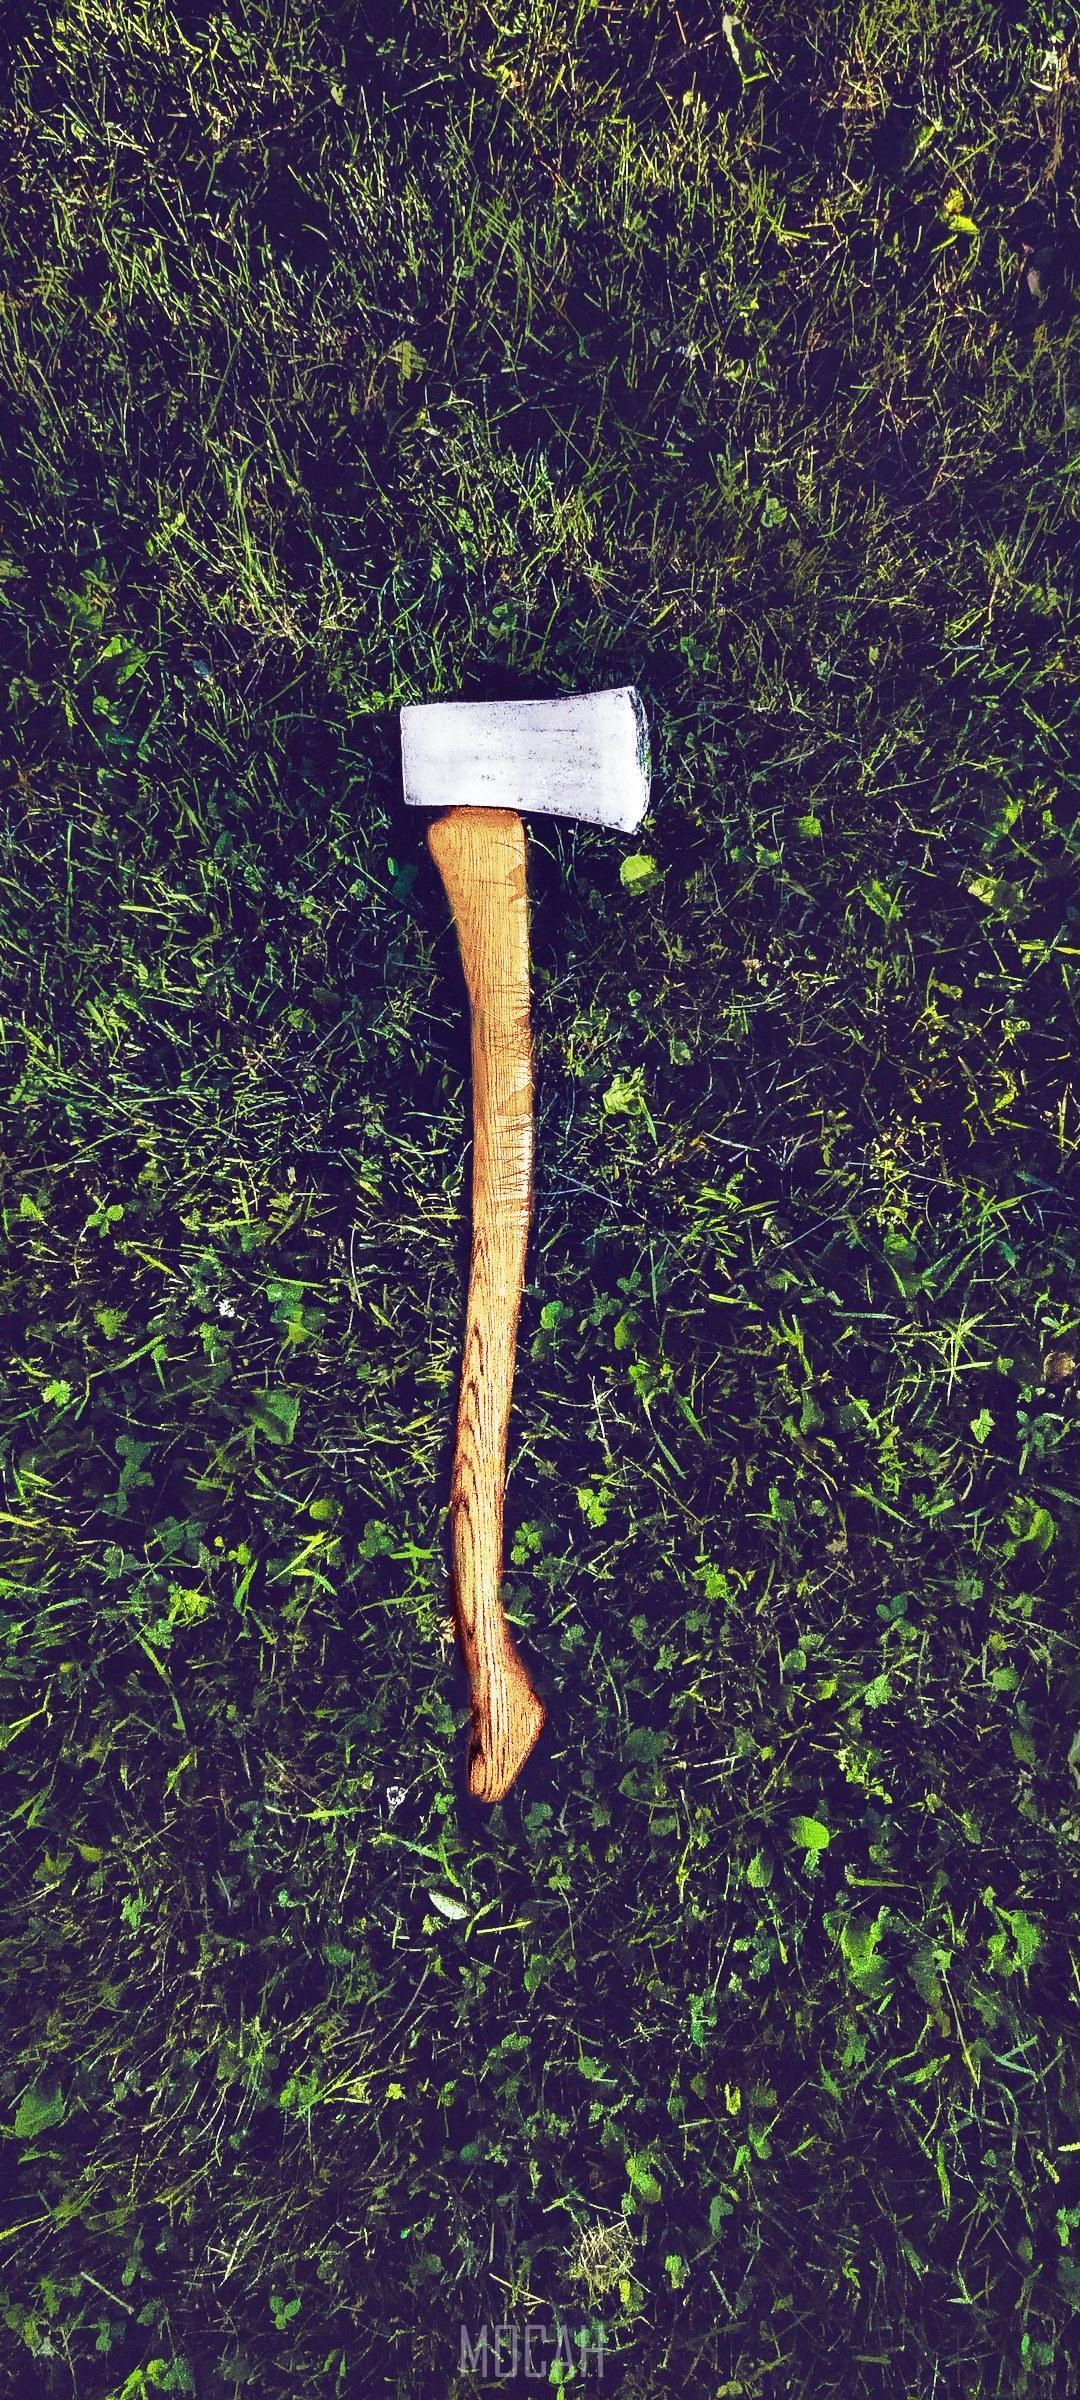 HD wallpaper, A Cut Above, A Metal Ax With A Wooden Handle Laid Down In The Middle Of A Grassy Ground, 1080X2400, Oppo F15 Wallpaper Full Hd